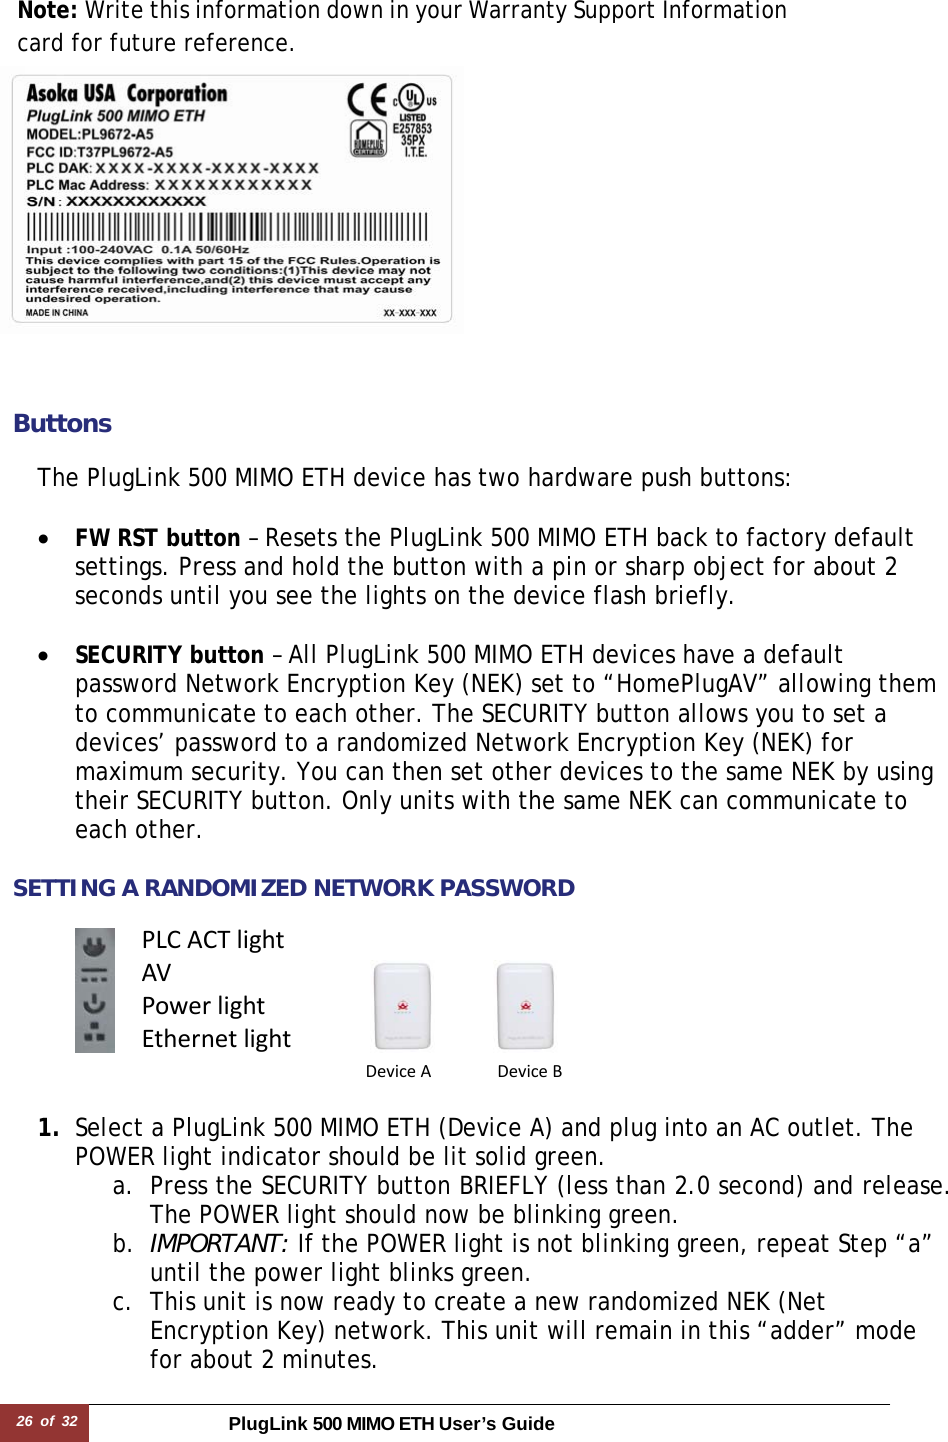 26 of 32 PlugLink 500 MIMO ETH User’s Guide   Note: Write this information down in your Warranty Support Information card for future reference.     ButtonsThe PlugLink 500 MIMO ETH device has two hardware push buttons:  • FW RST button – Resets the PlugLink 500 MIMO ETH back to factory default settings. Press and hold the button with a pin or sharp object for about 2 seconds until you see the lights on the device flash briefly.  • SECURITY button – All PlugLink 500 MIMO ETH devices have a default password Network Encryption Key (NEK) set to “HomePlugAV” allowing them to communicate to each other. The SECURITY button allows you to set a devices’ password to a randomized Network Encryption Key (NEK) for maximum security. You can then set other devices to the same NEK by using their SECURITY button. Only units with the same NEK can communicate to each other.  SETTING A RANDOMIZED NETWORK PASSWORD       1. Select a PlugLink 500 MIMO ETH (Device A) and plug into an AC outlet. The POWER light indicator should be lit solid green. a. Press the SECURITY button BRIEFLY (less than 2.0 second) and release. The POWER light should now be blinking green. b. IMPORTANT: If the POWER light is not blinking green, repeat Step “a” until the power light blinks green.  c. This unit is now ready to create a new randomized NEK (Net Encryption Key) network. This unit will remain in this “adder” mode for about 2 minutes.  PLCACTlightAVPowerlightEthernetlightDeviceADeviceB